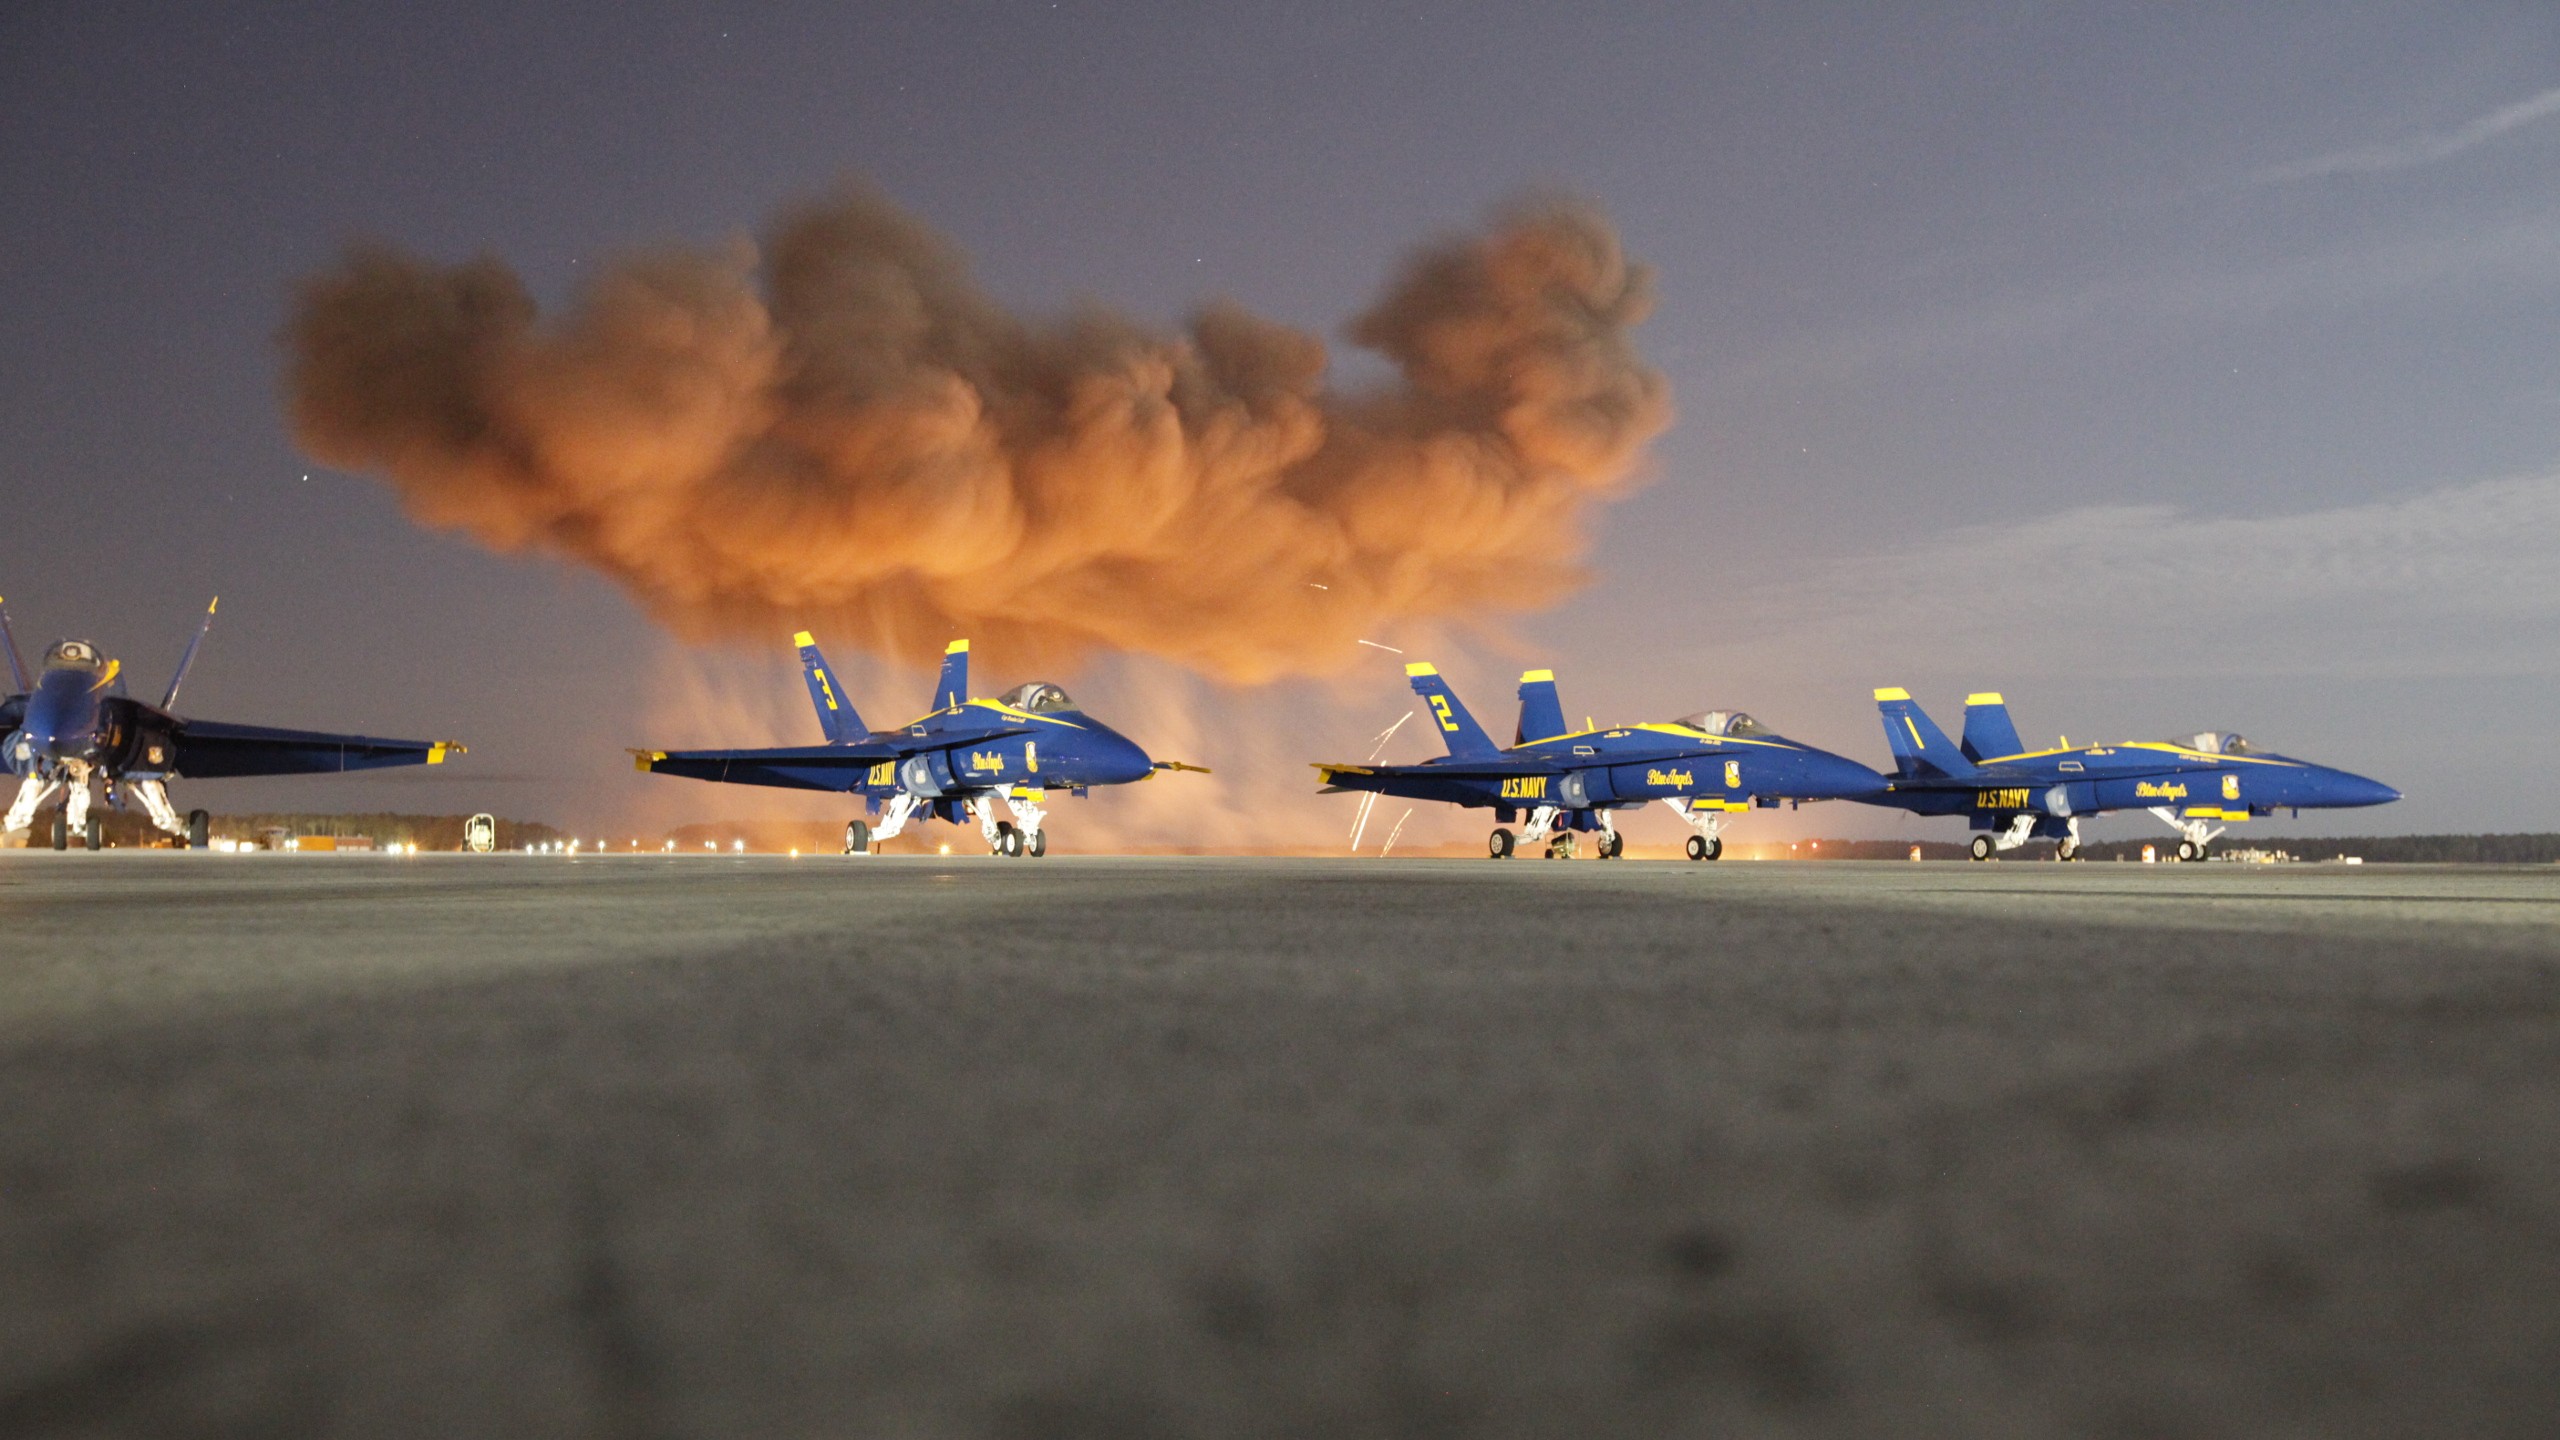 General 2560x1440 military aircraft military aircraft airplane jet fighter Blue Angels McDonnell Douglas F/A-18 Hornet military vehicle smoke vehicle